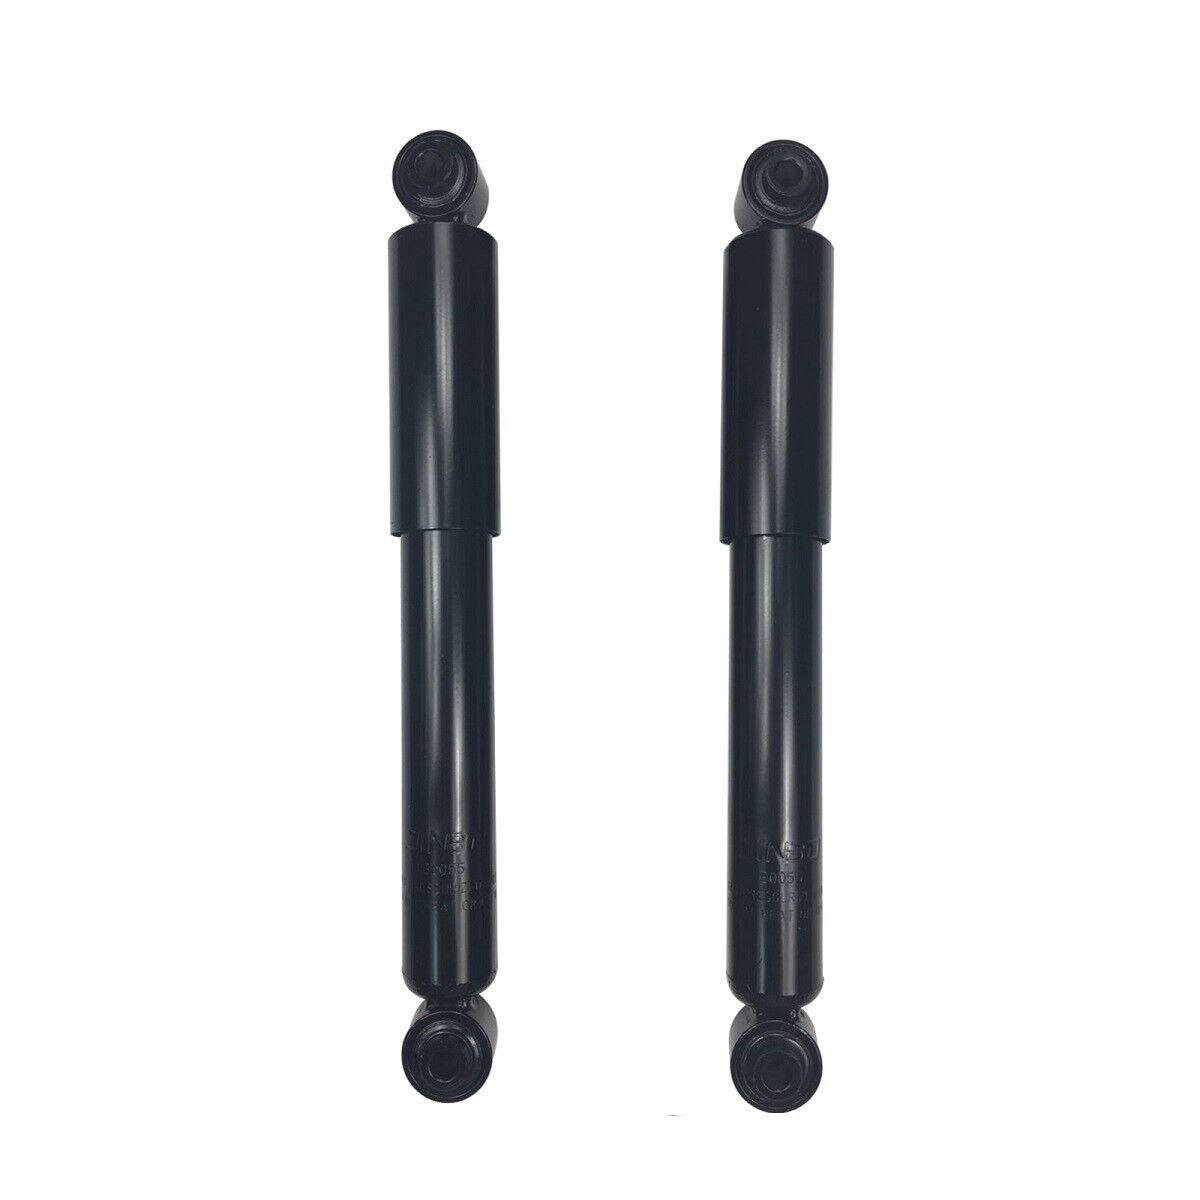 (Out of Stock) Pair Rear Shock Absorbers for Toyota Rav4 2006 2007 2008 2009 2010 - 2018